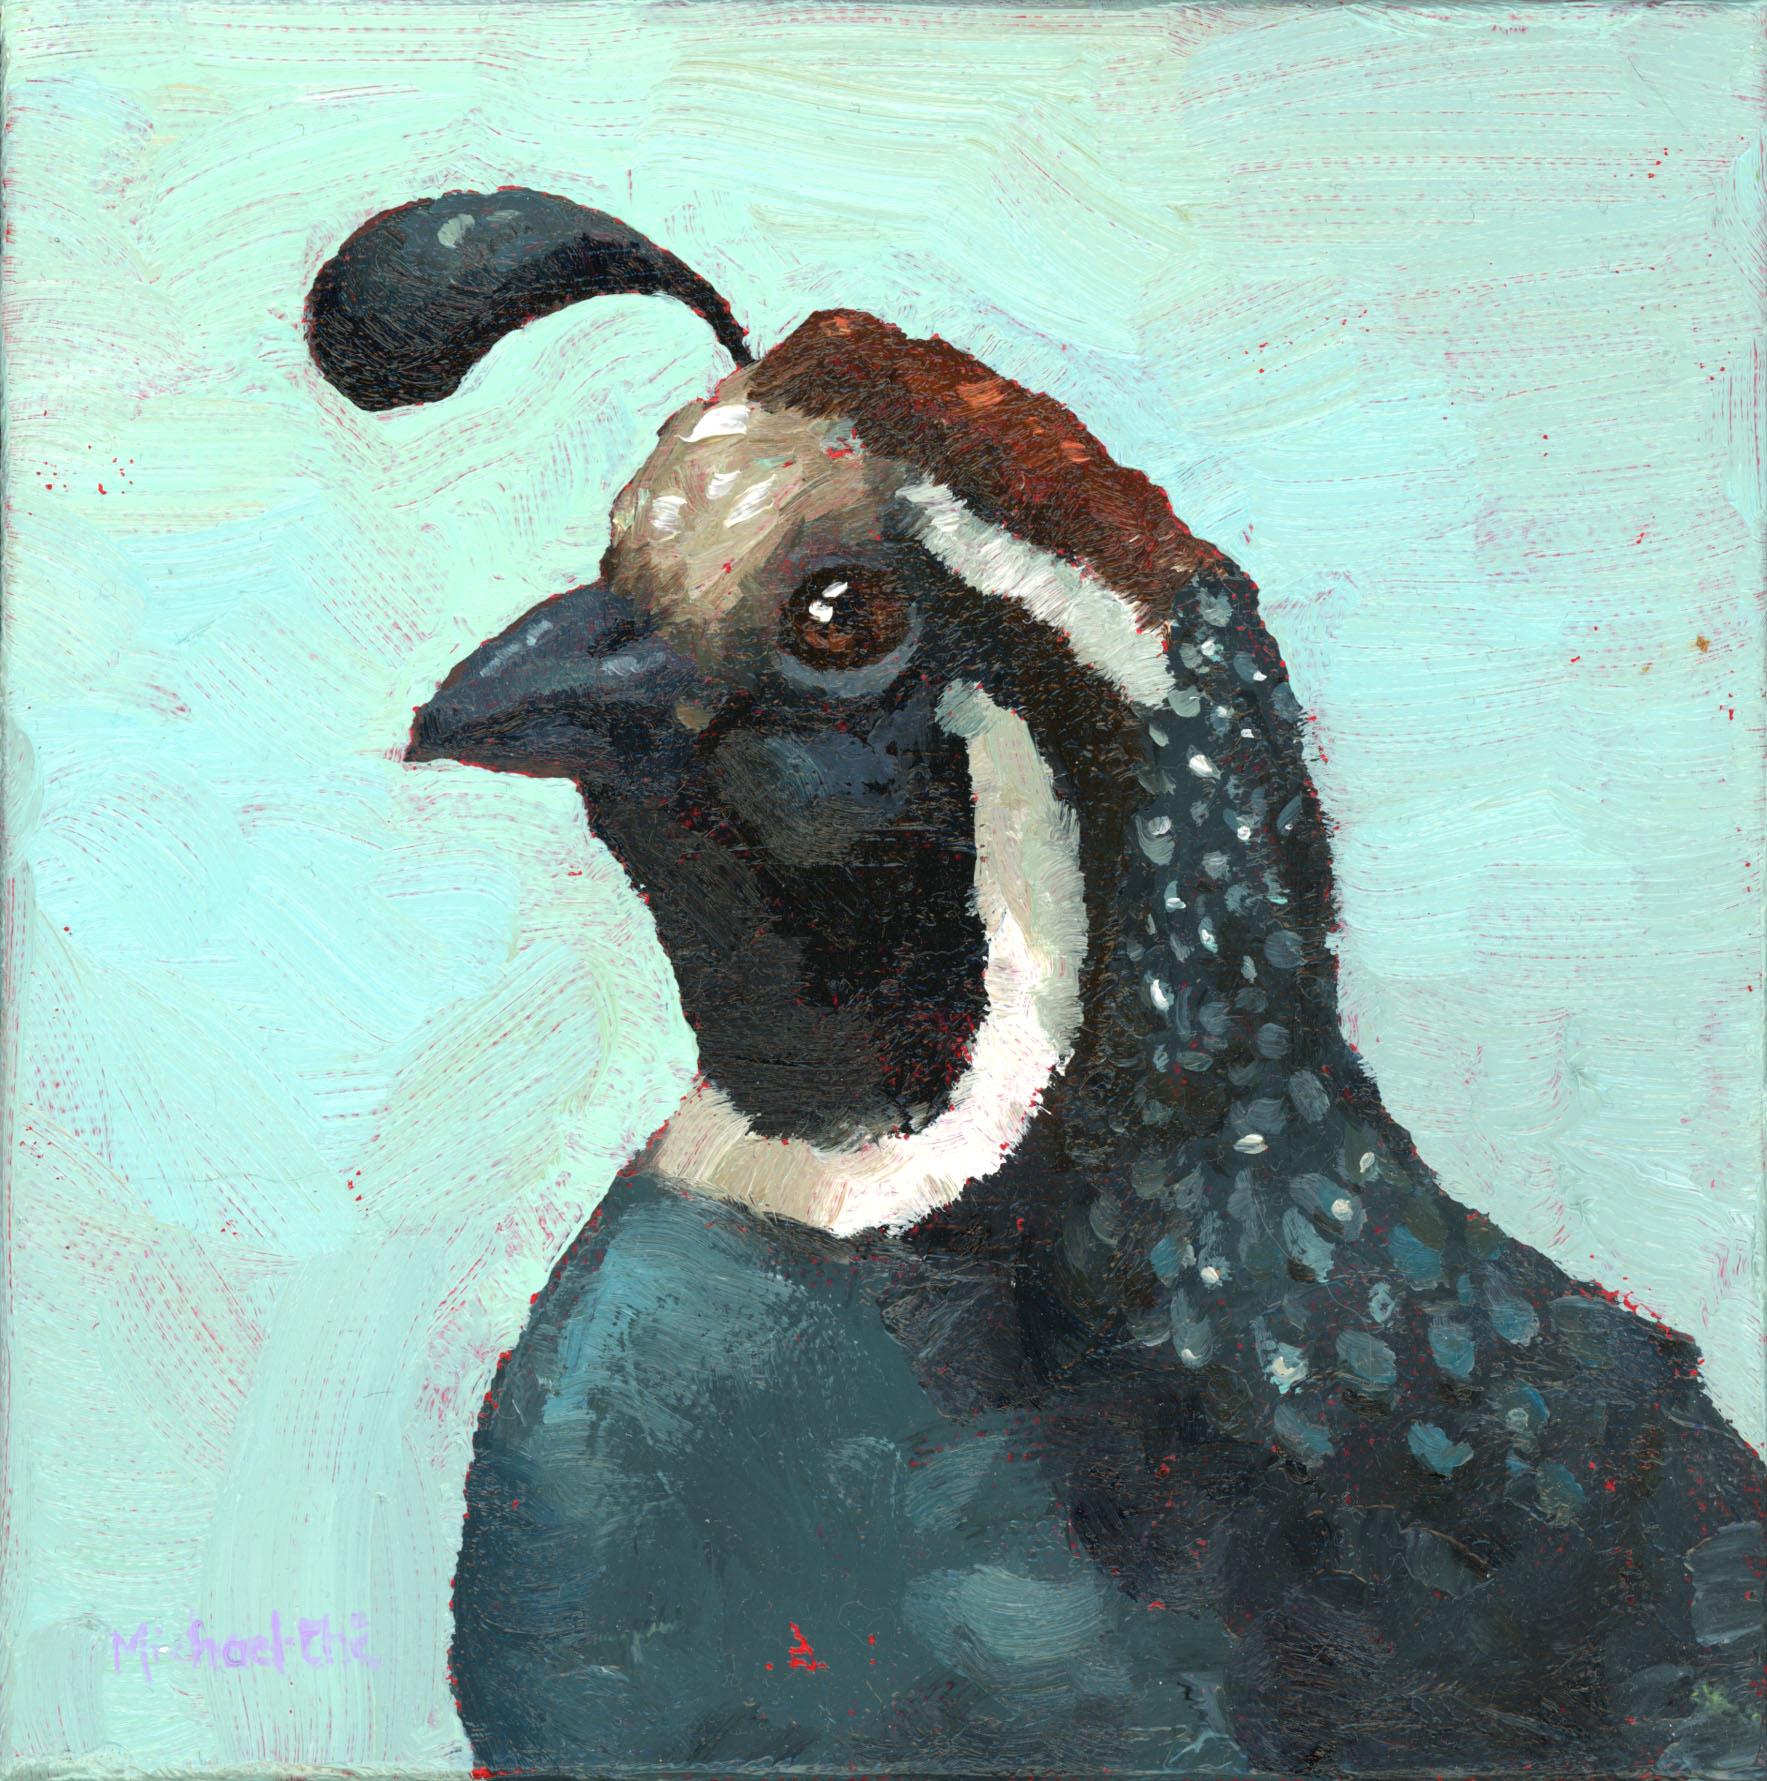 Michael-Che Swisher Animal Painting - "On A Good Day" Oil Painting of a quail over a turquoise background